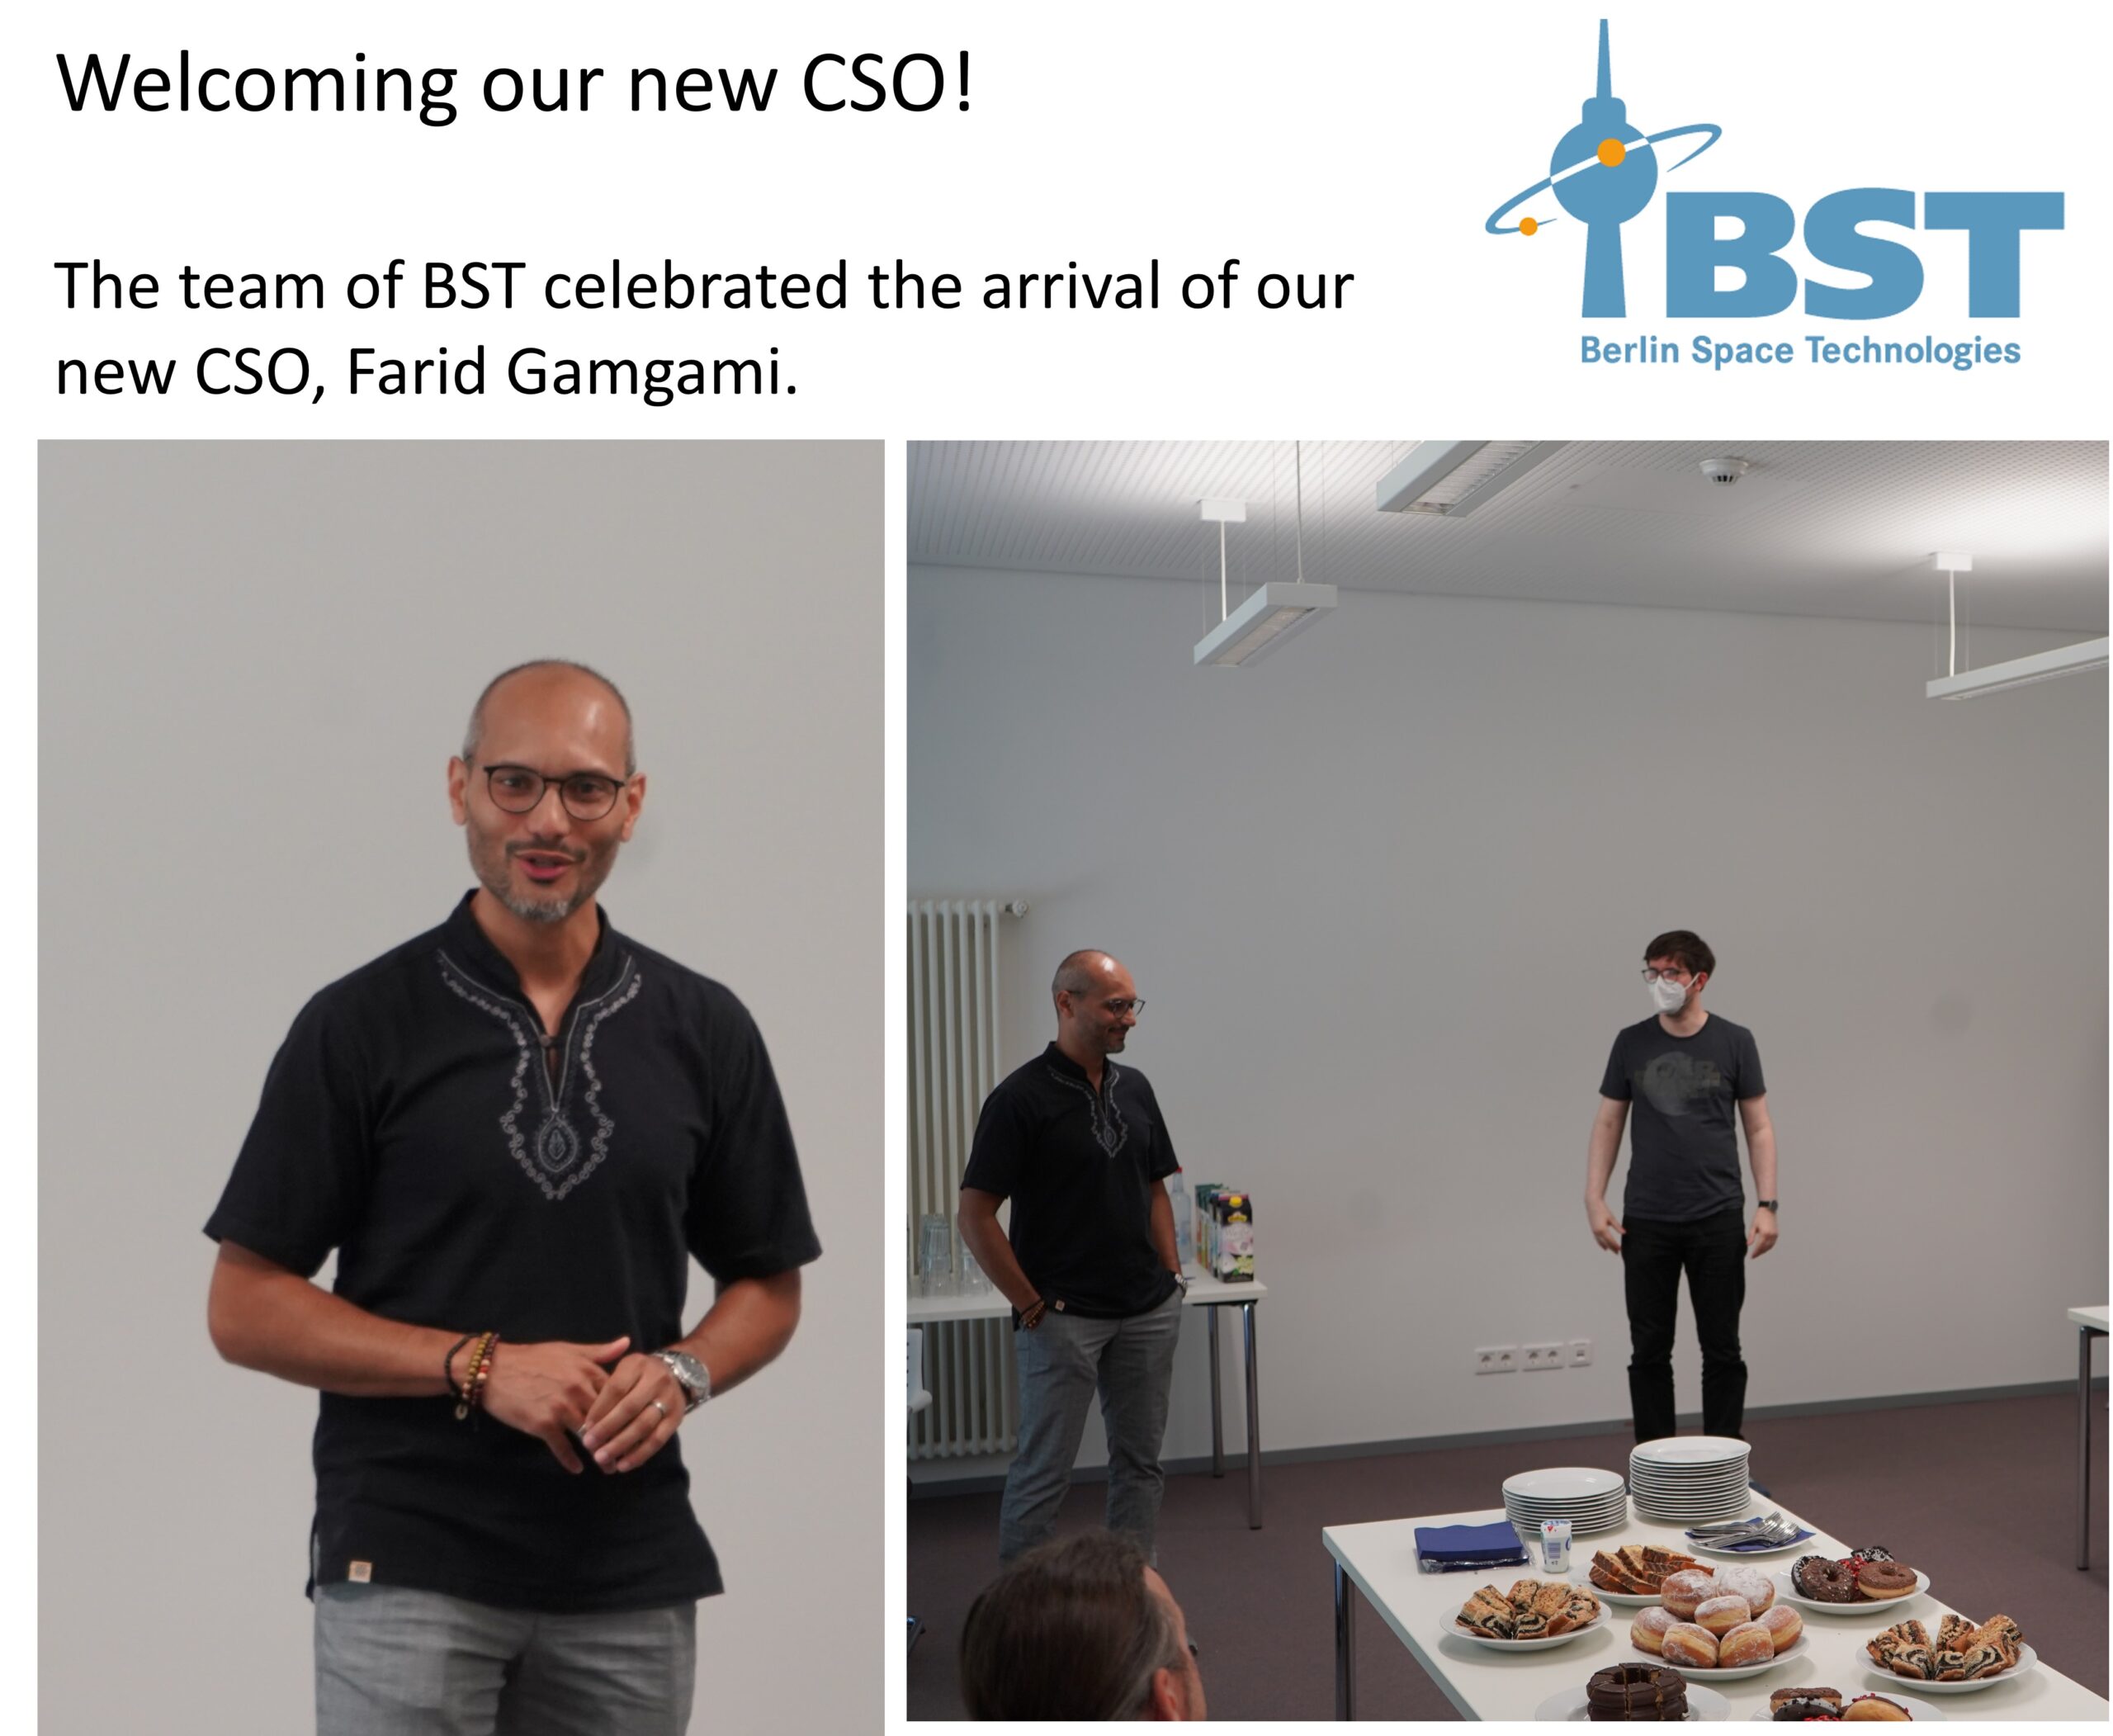 Welcoming our new CSO!